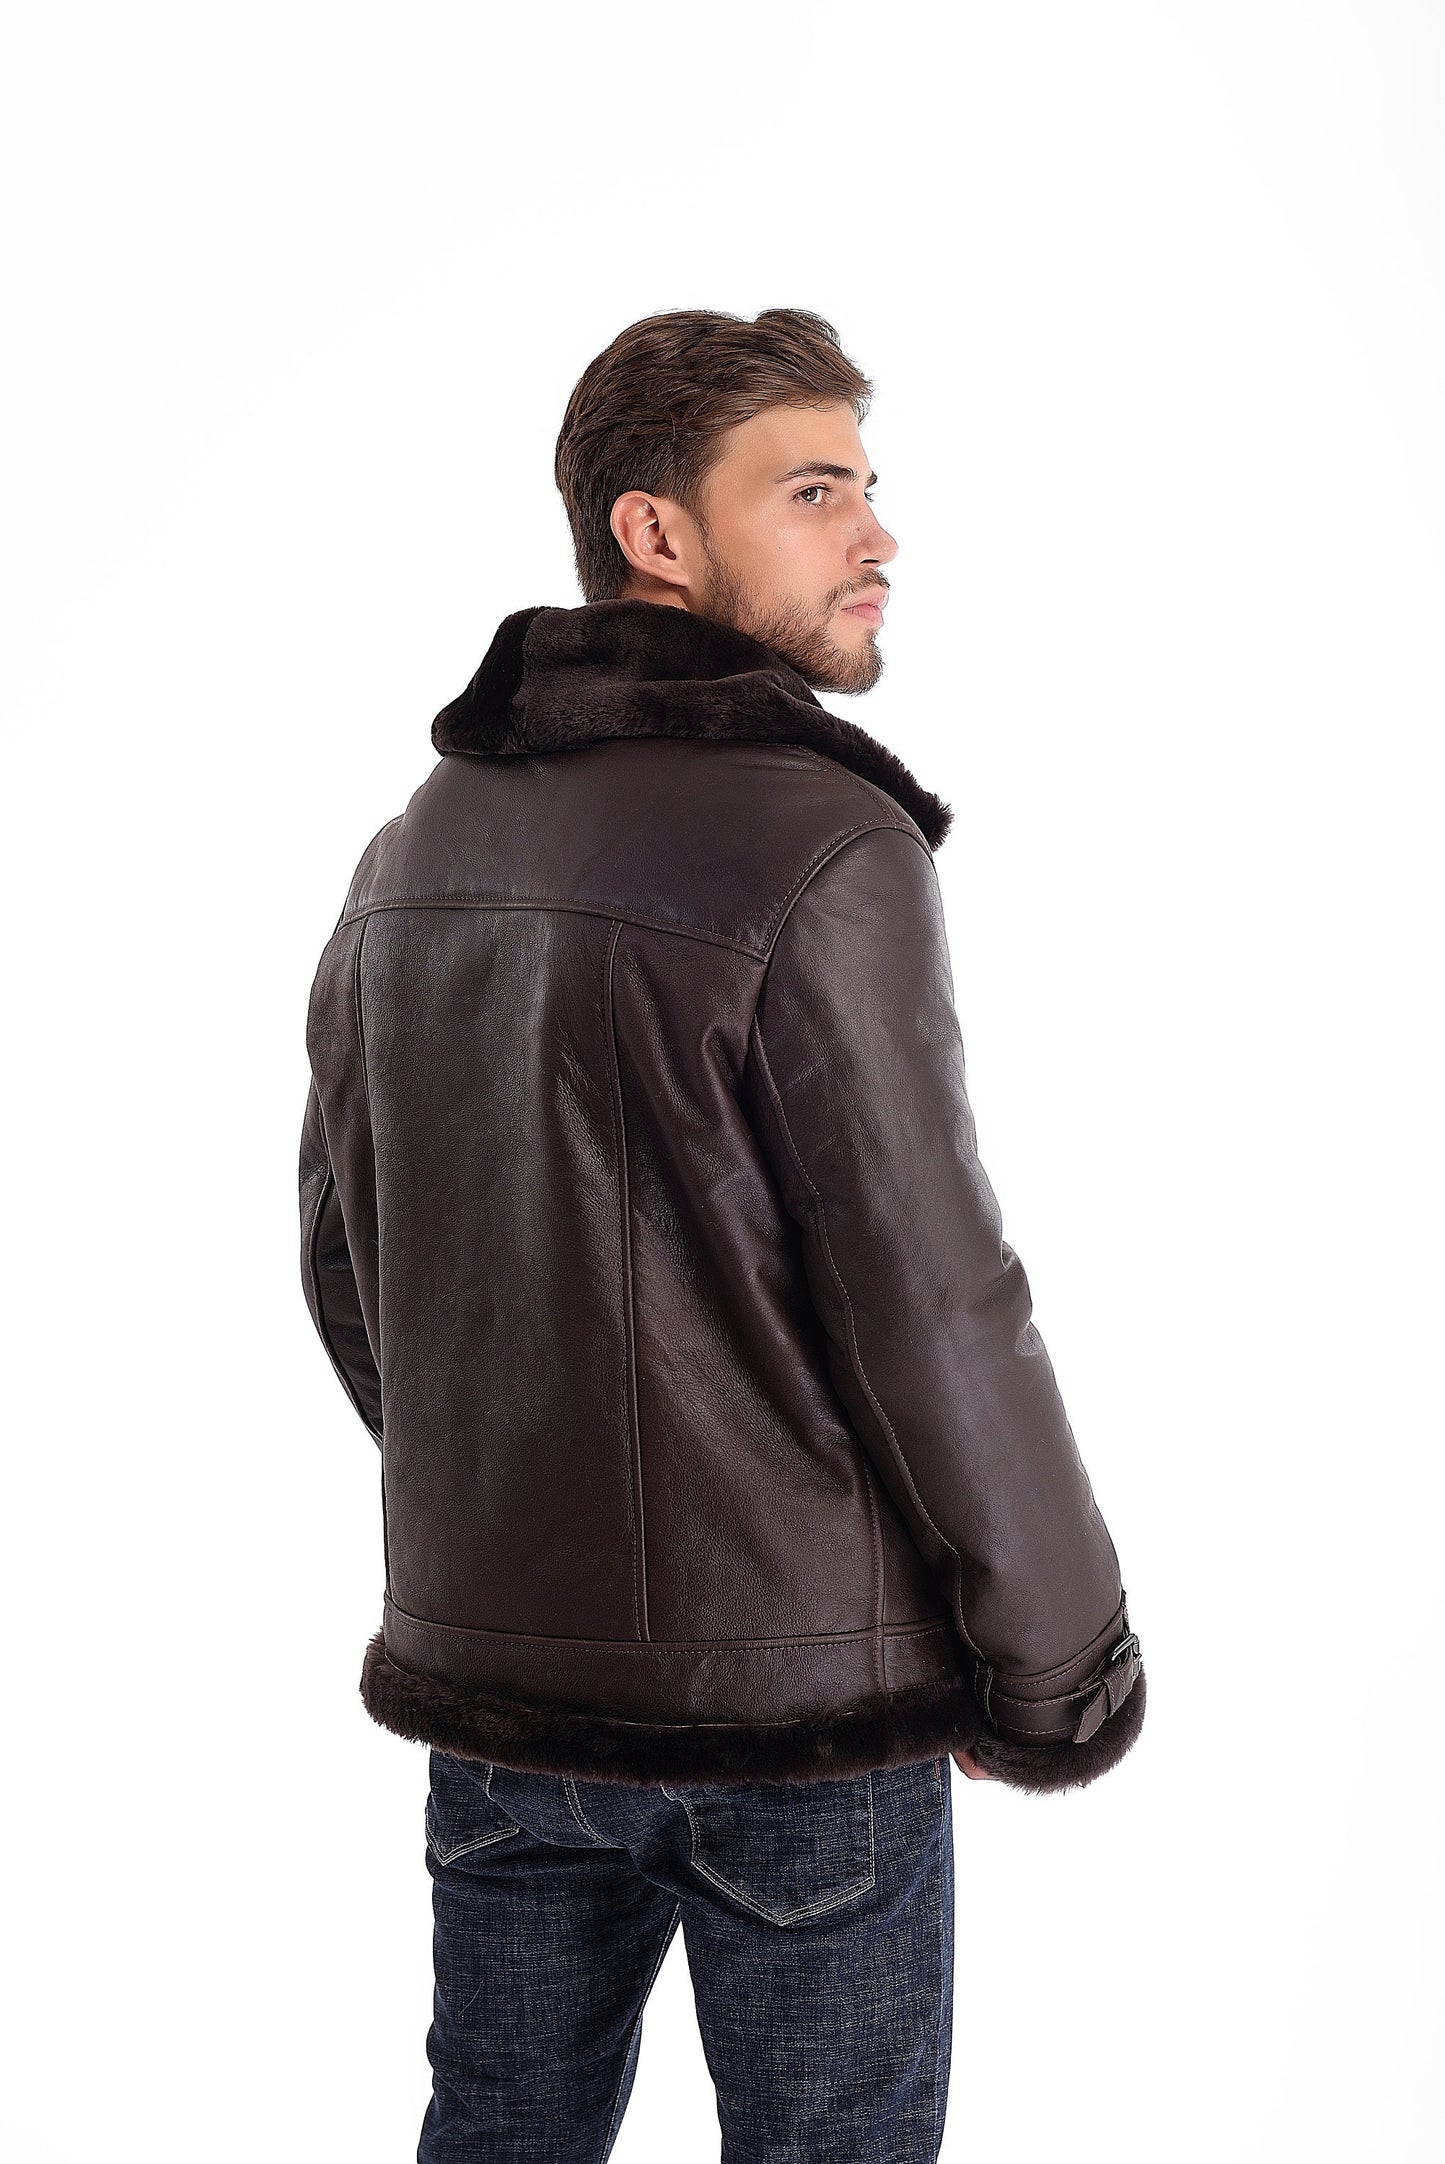 Real Shearling Sheepskin Leather Mens Pilot Jacket in Dark Brown Color with Wide Collar